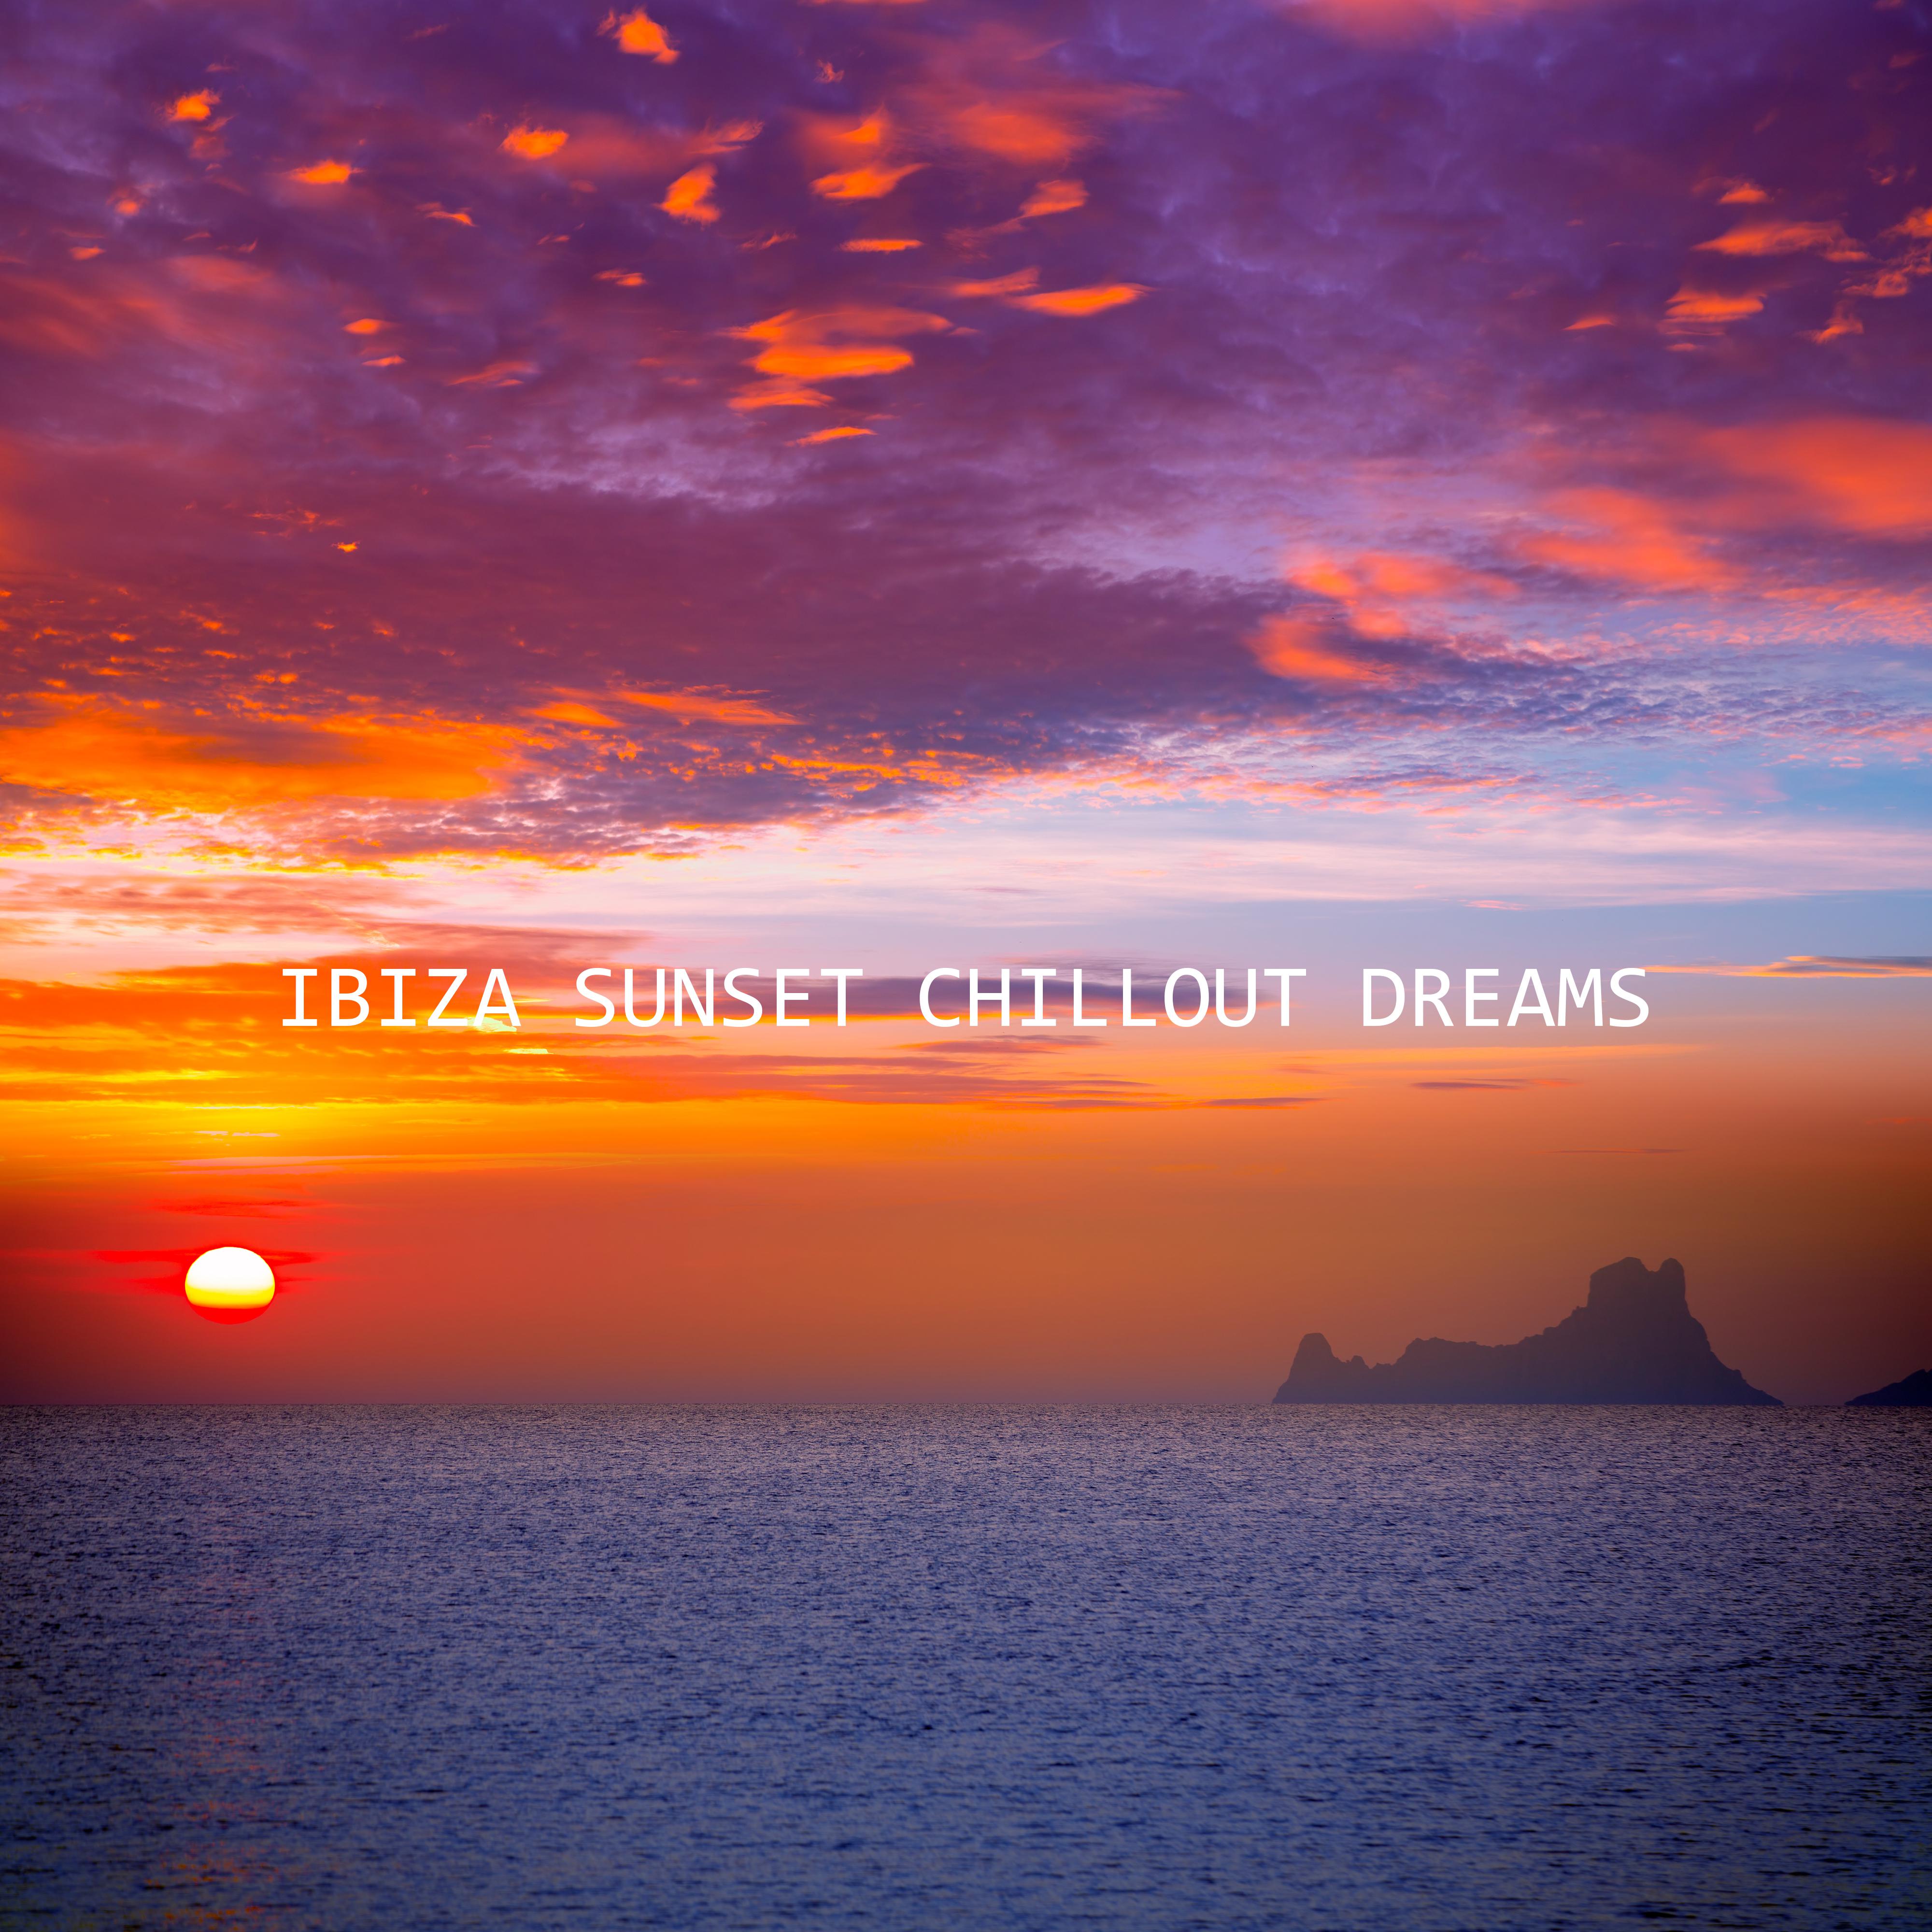 Ibiza Sunset Chillout Dreams  Best Chill Out Music Collection for Summer Relaxation, Positive Vibes, After Party Sounds, Ambient Deep House Melodies